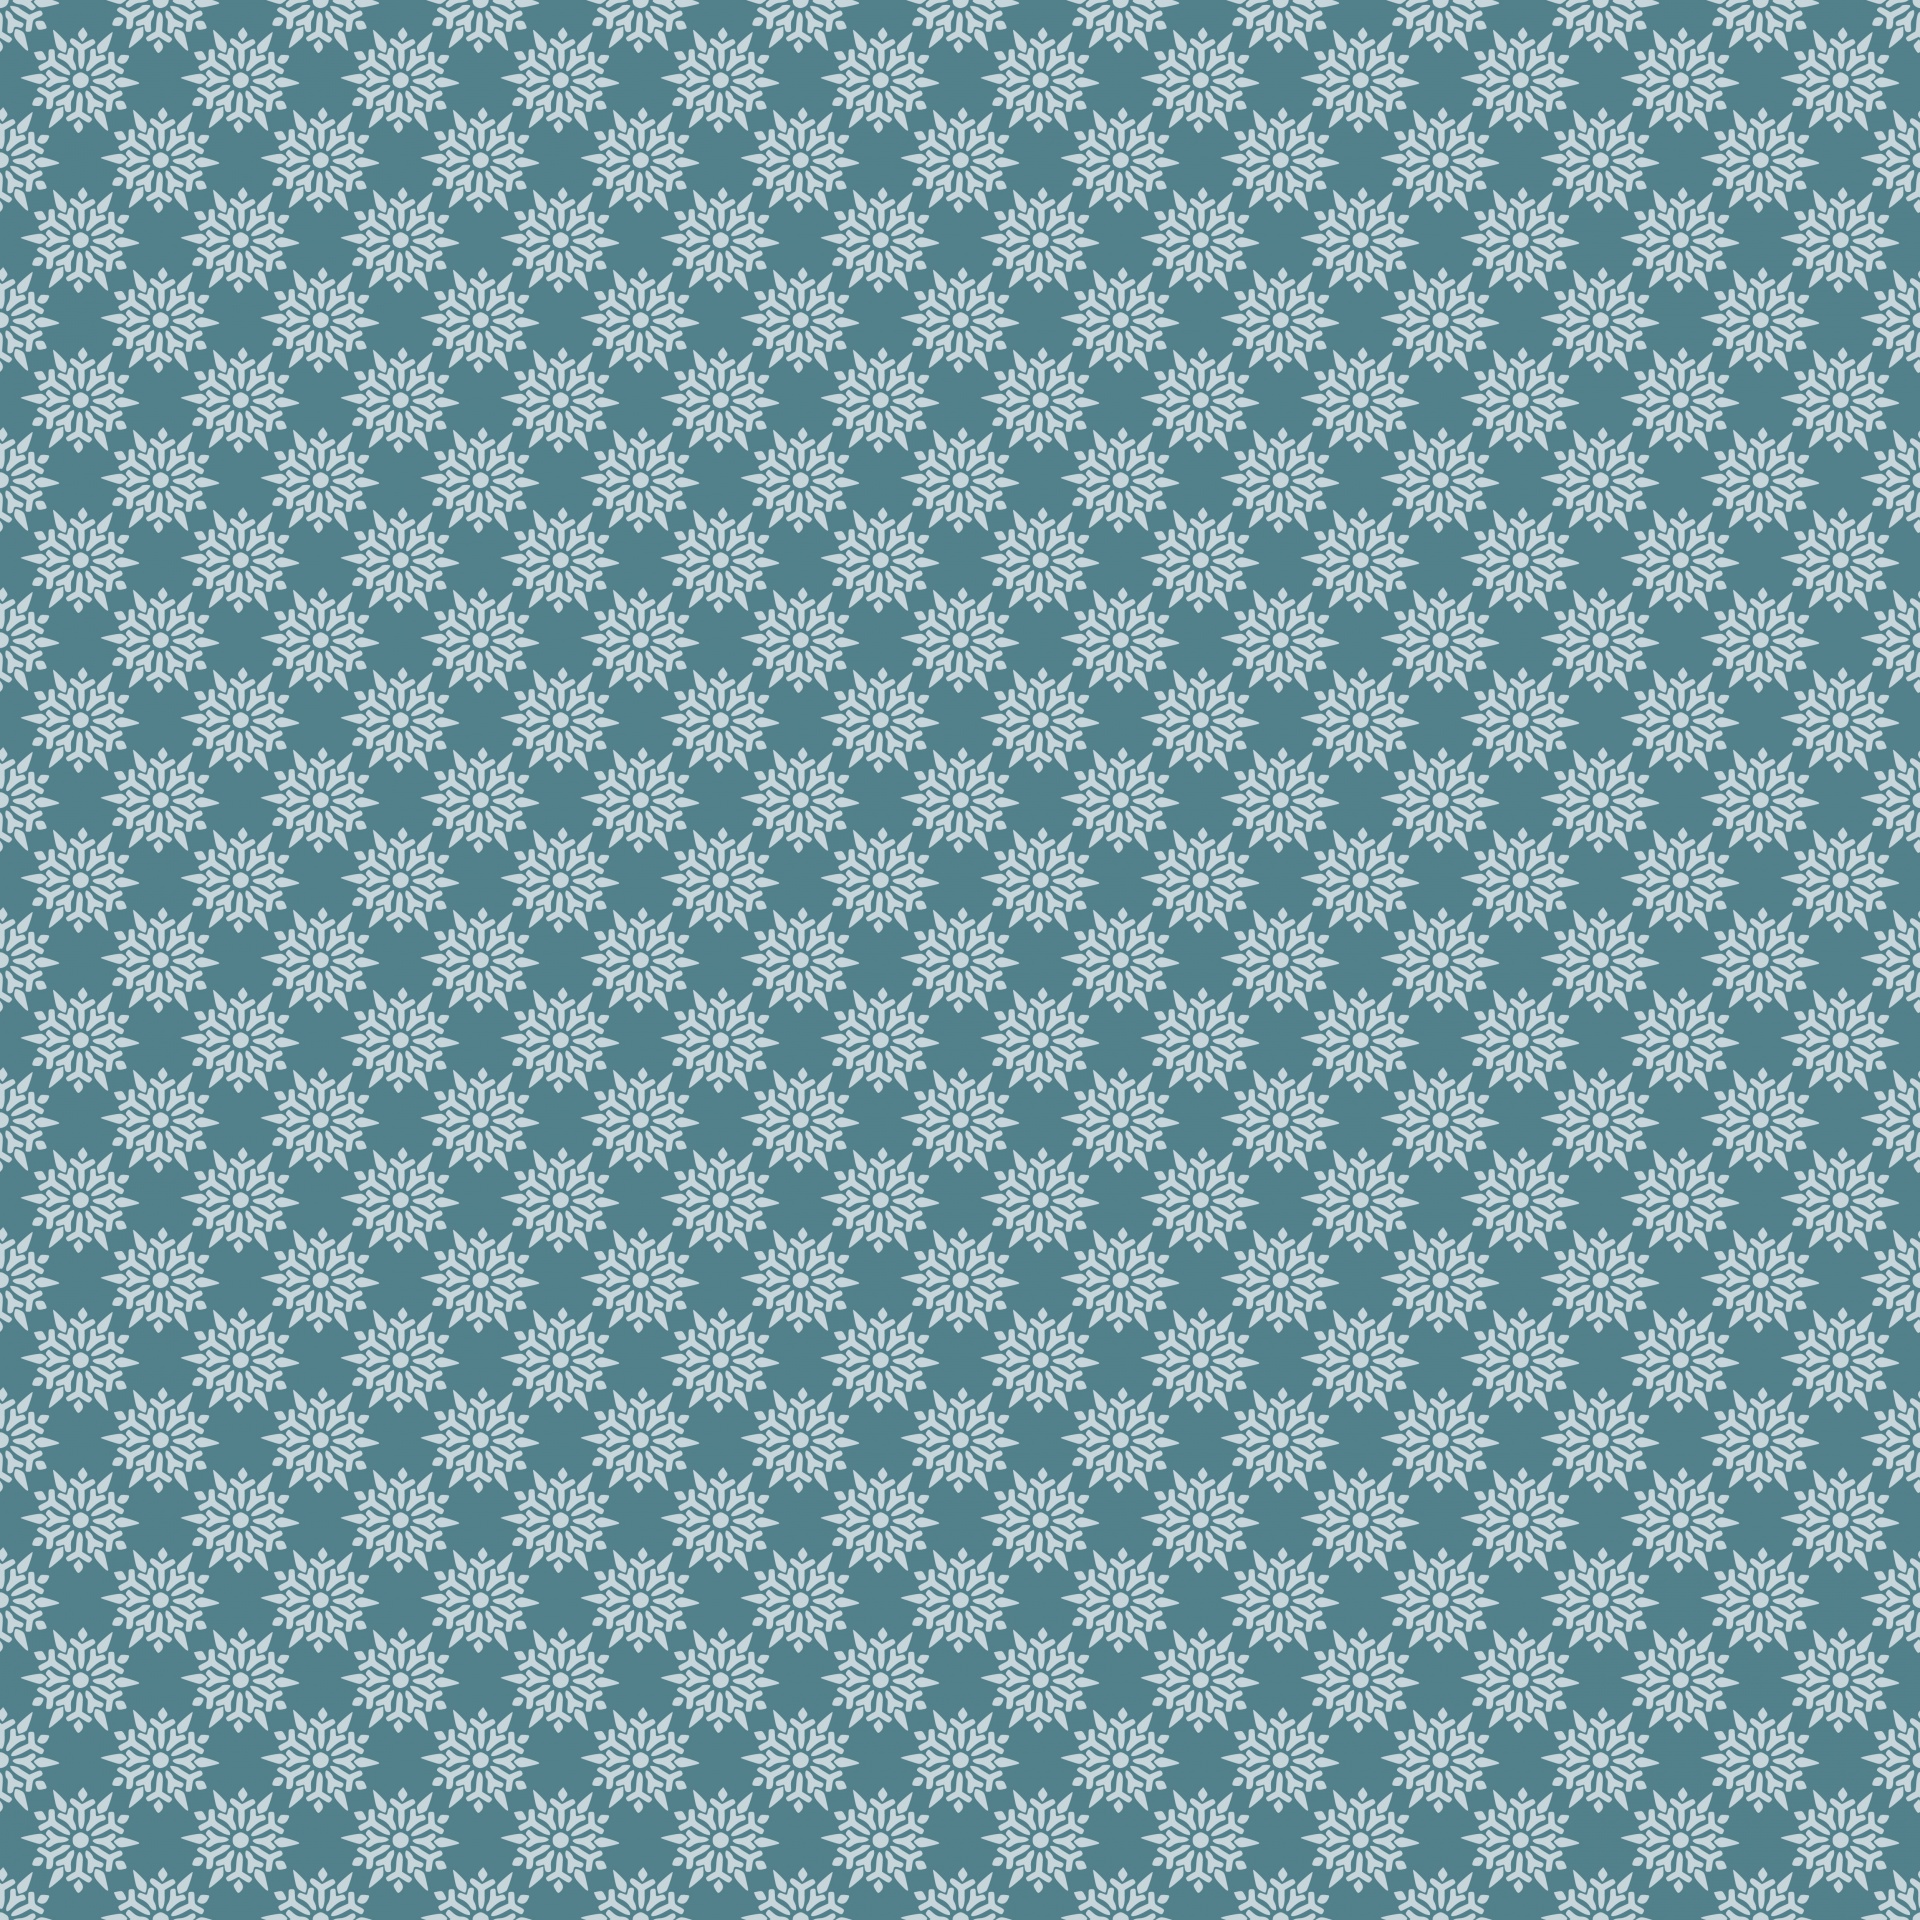 Snowflakes Pattern Background